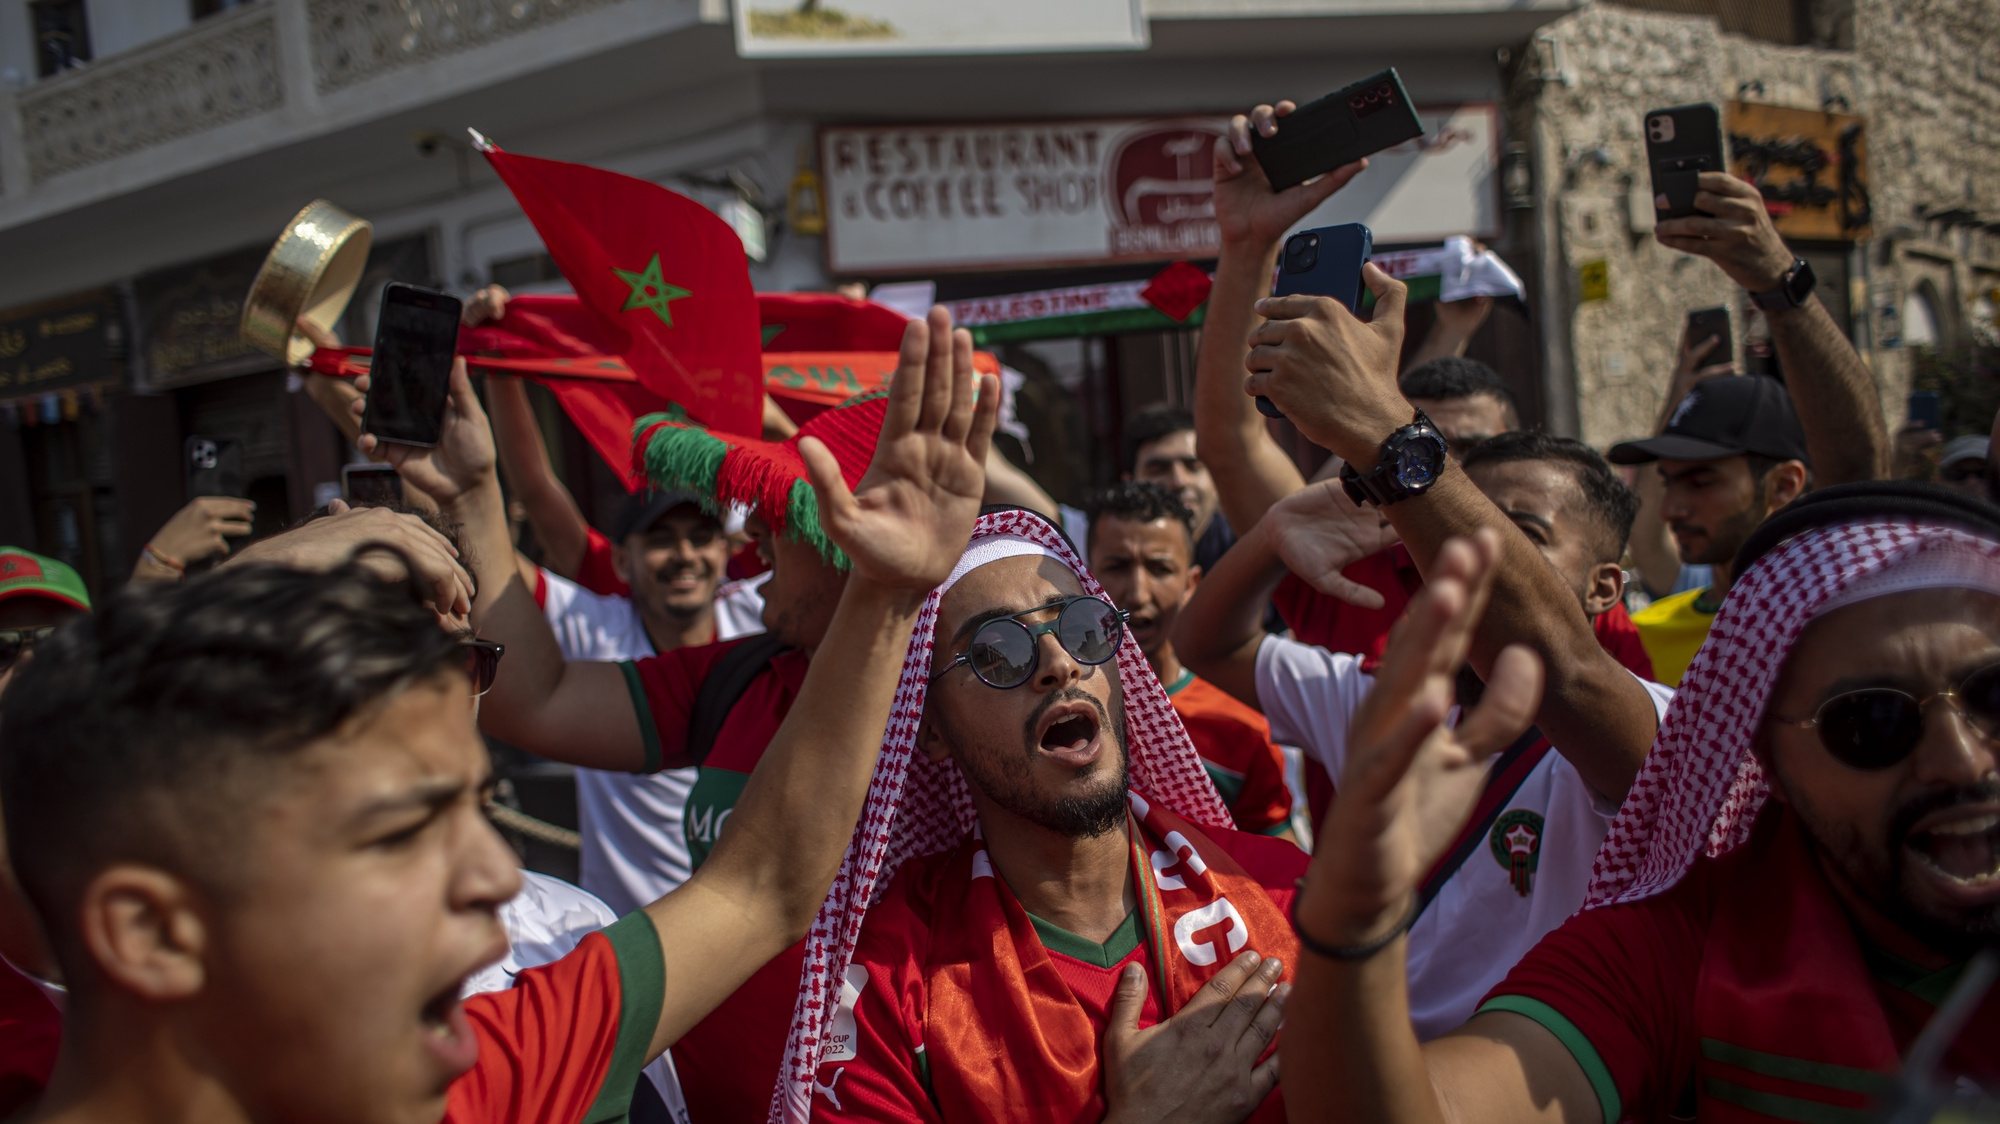 epa10351471 Fans of Morocco cheer at the traditional market Souq Waqif during the FIFA World Cup 2022 in Doha, Qatar, 06 December 2022. Morocco will face Spain in their FIFA World Cup 2022 round of 16 soccer match on 06 December.  EPA/MARTIN DIVISEK